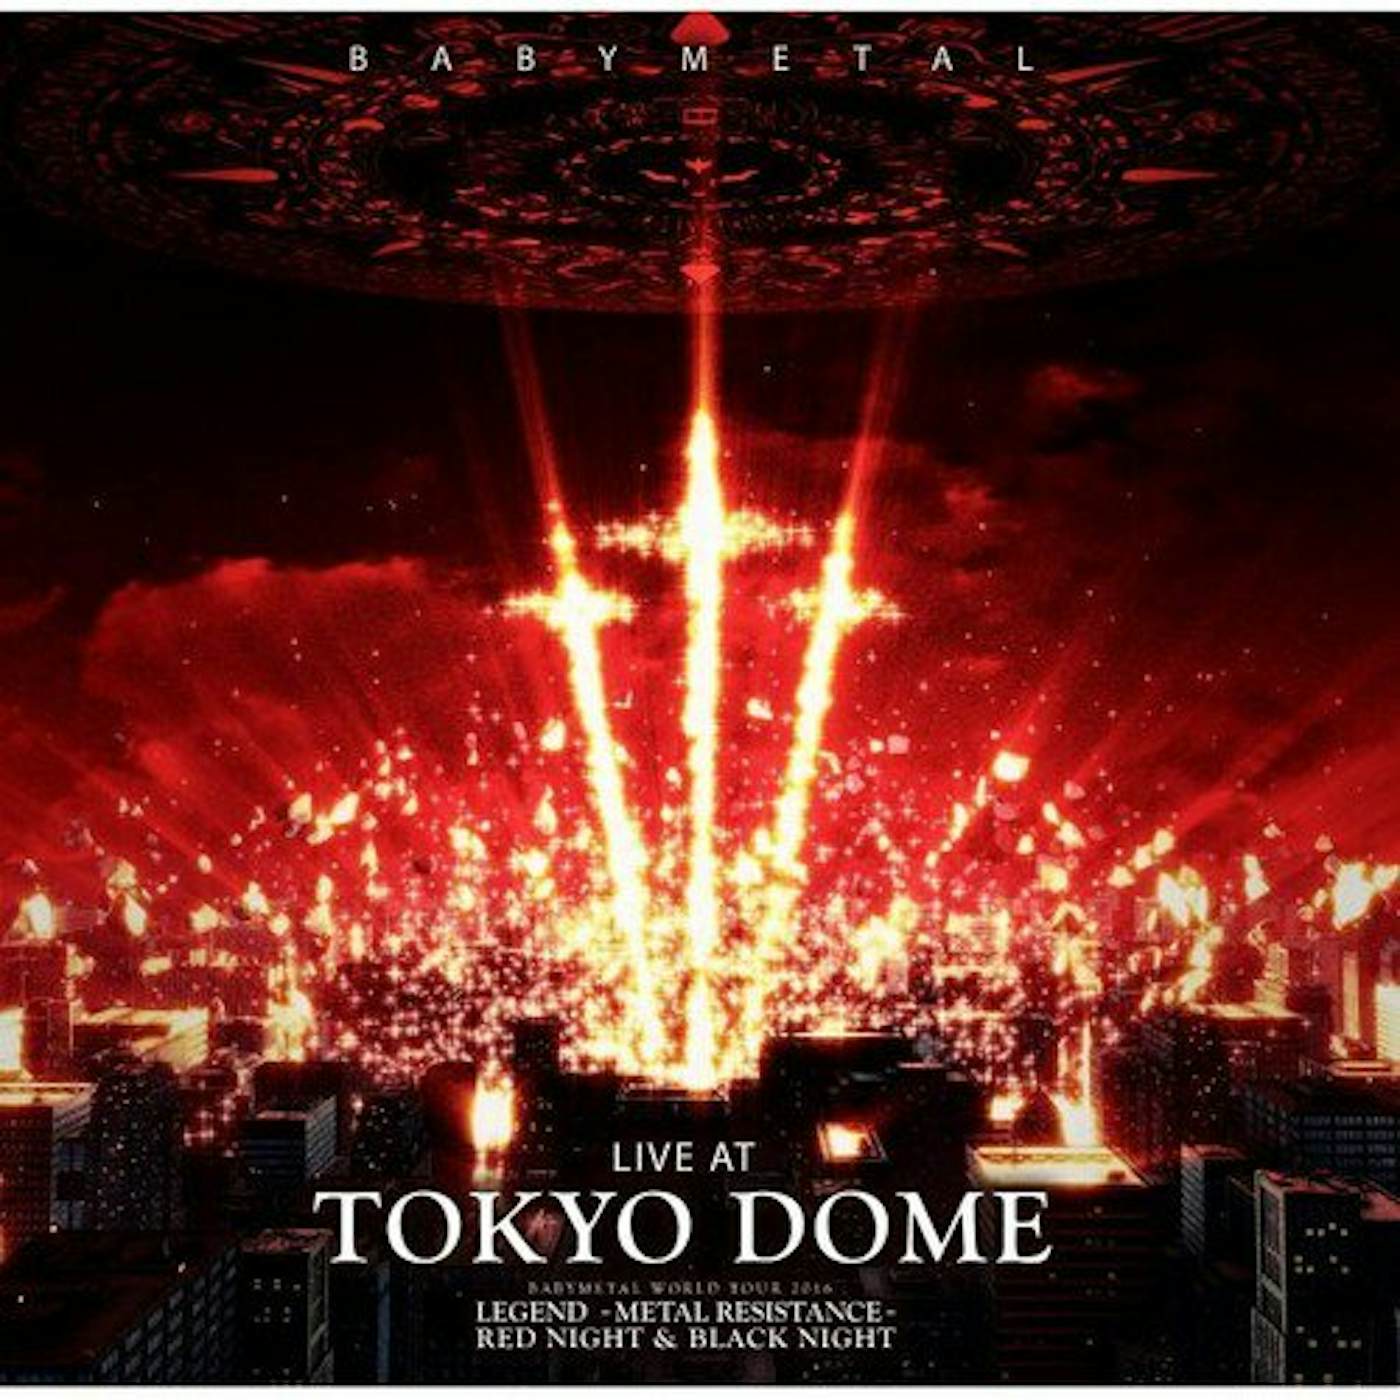 Tokyo live. BABYMETAL the one Red Night Tokyo Dome. BABYMETAL - Live at Tokyo Dome - Red Night 2016 Full Concert. BABYMETAL: Live at Tokyo Dome. BABYMETAL - Metal Resistance (2016).